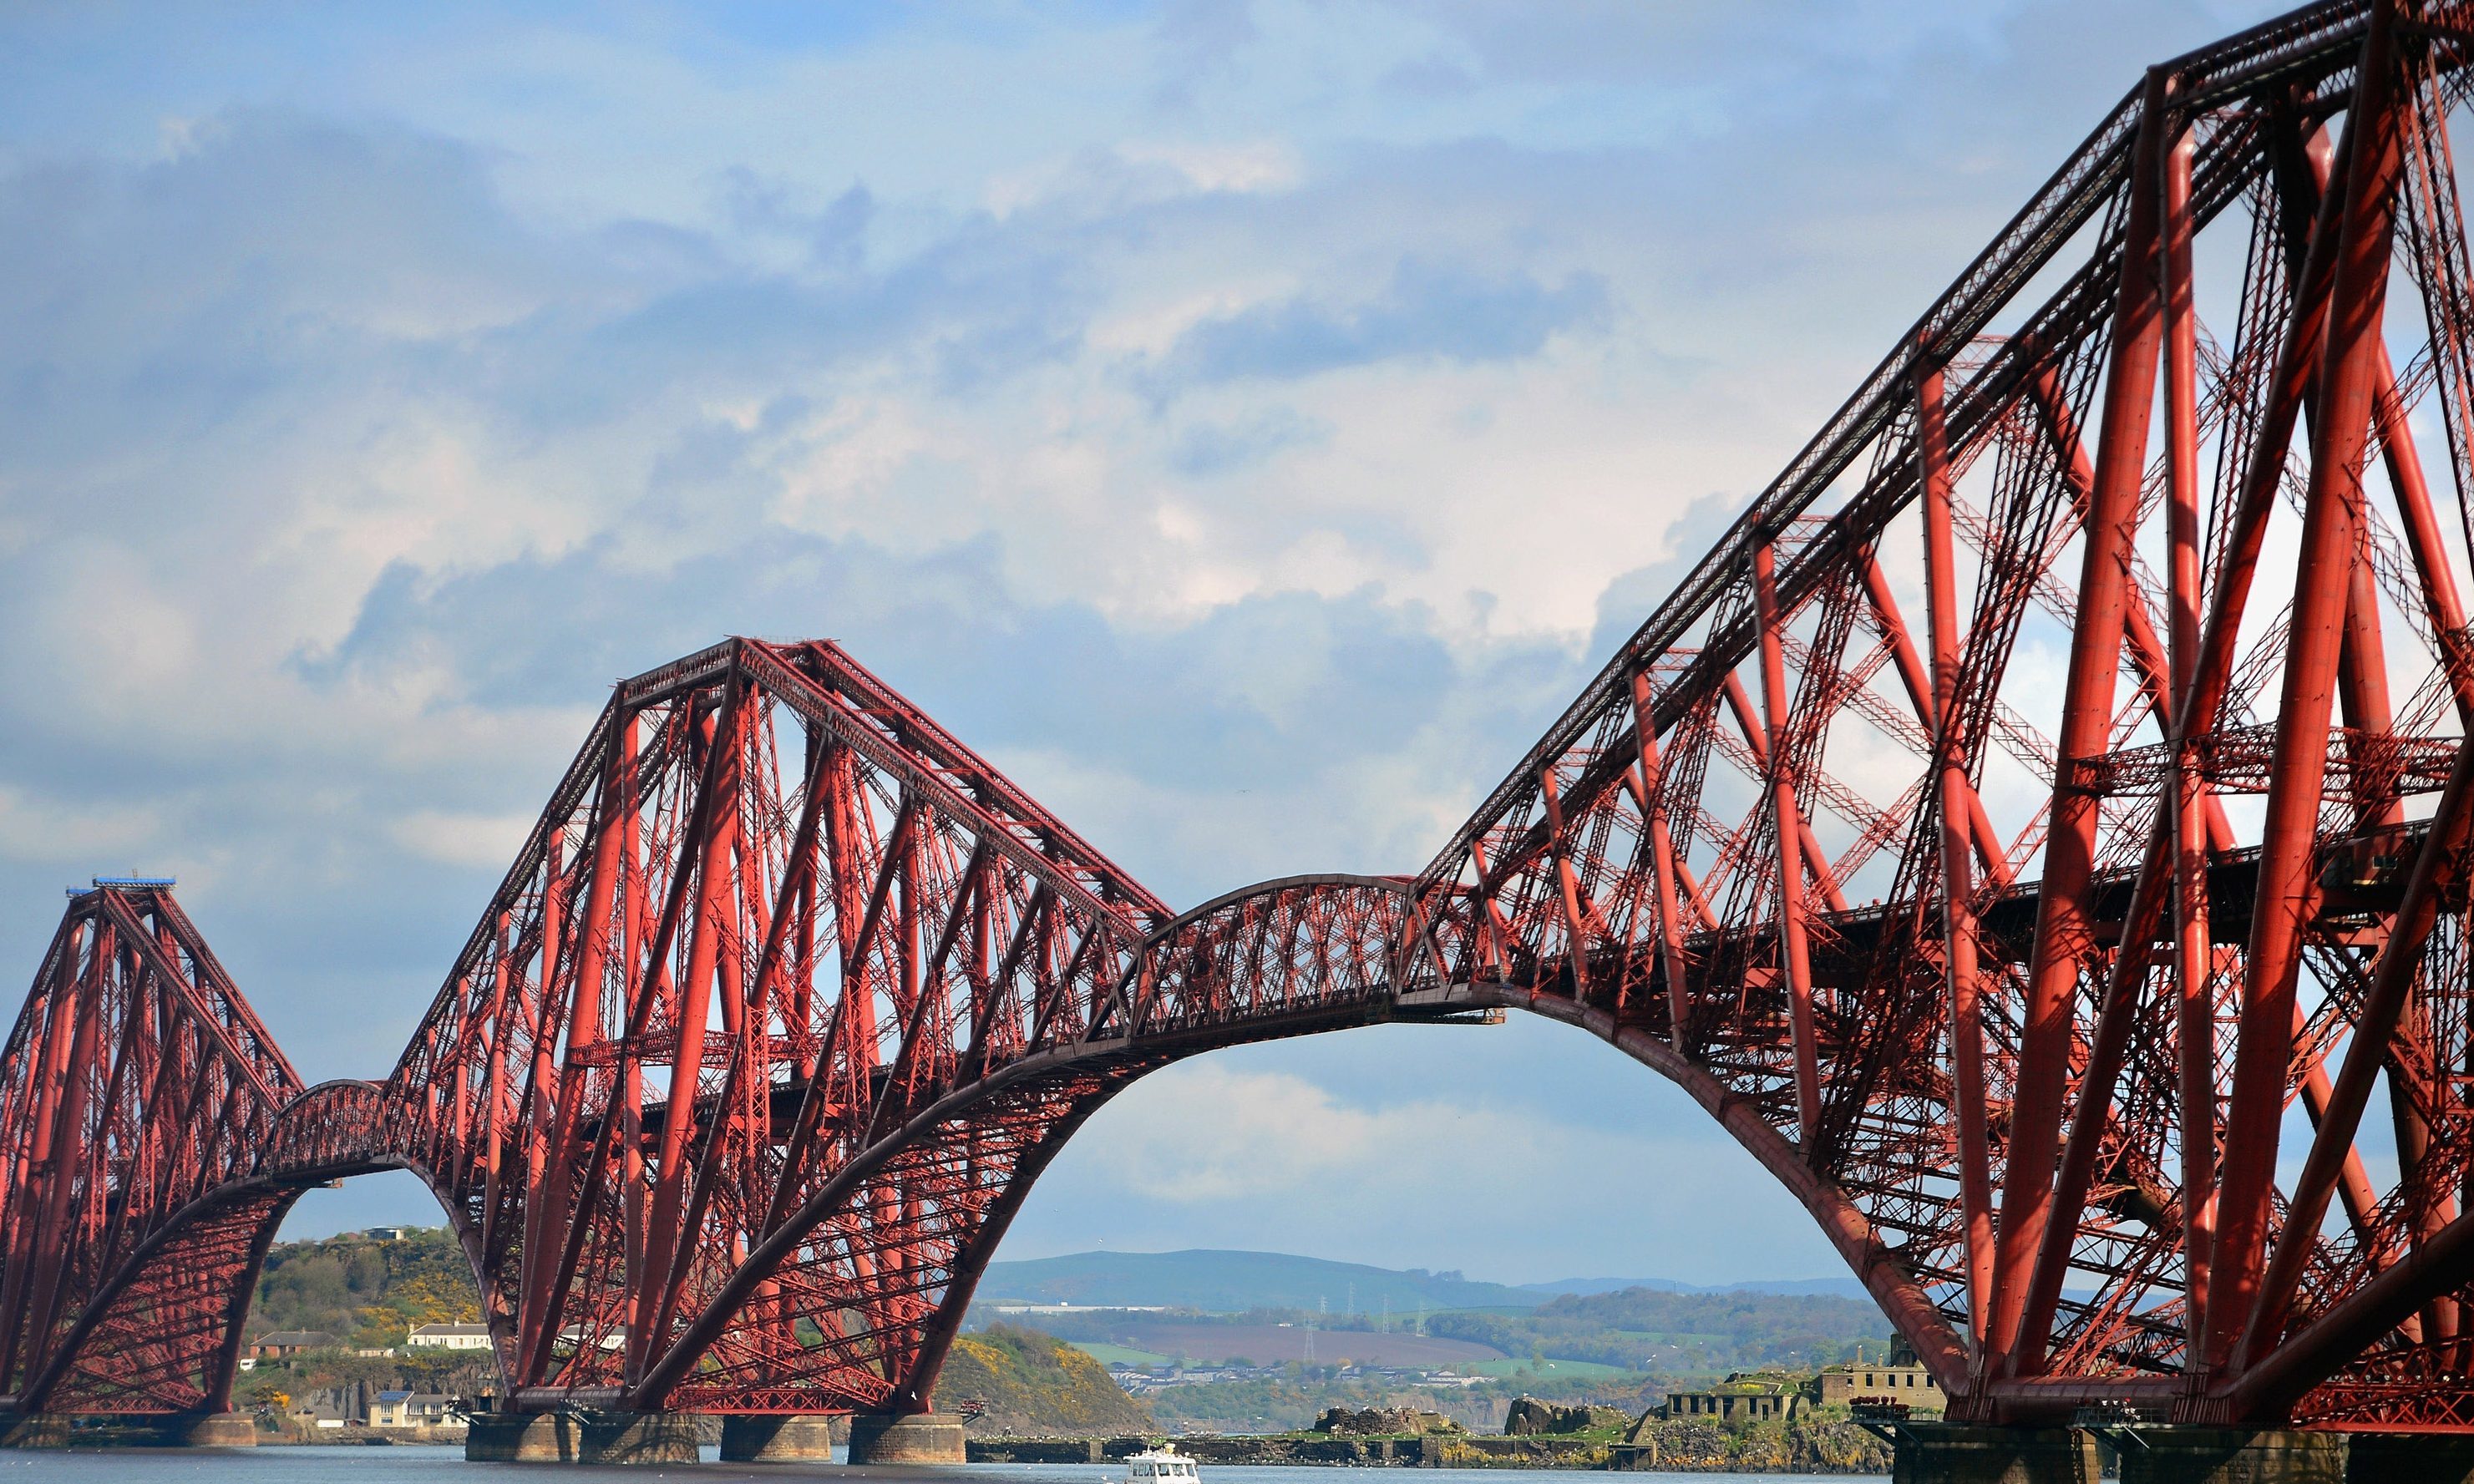 A model of the Forth Bridge attracted international travel writers to Fife